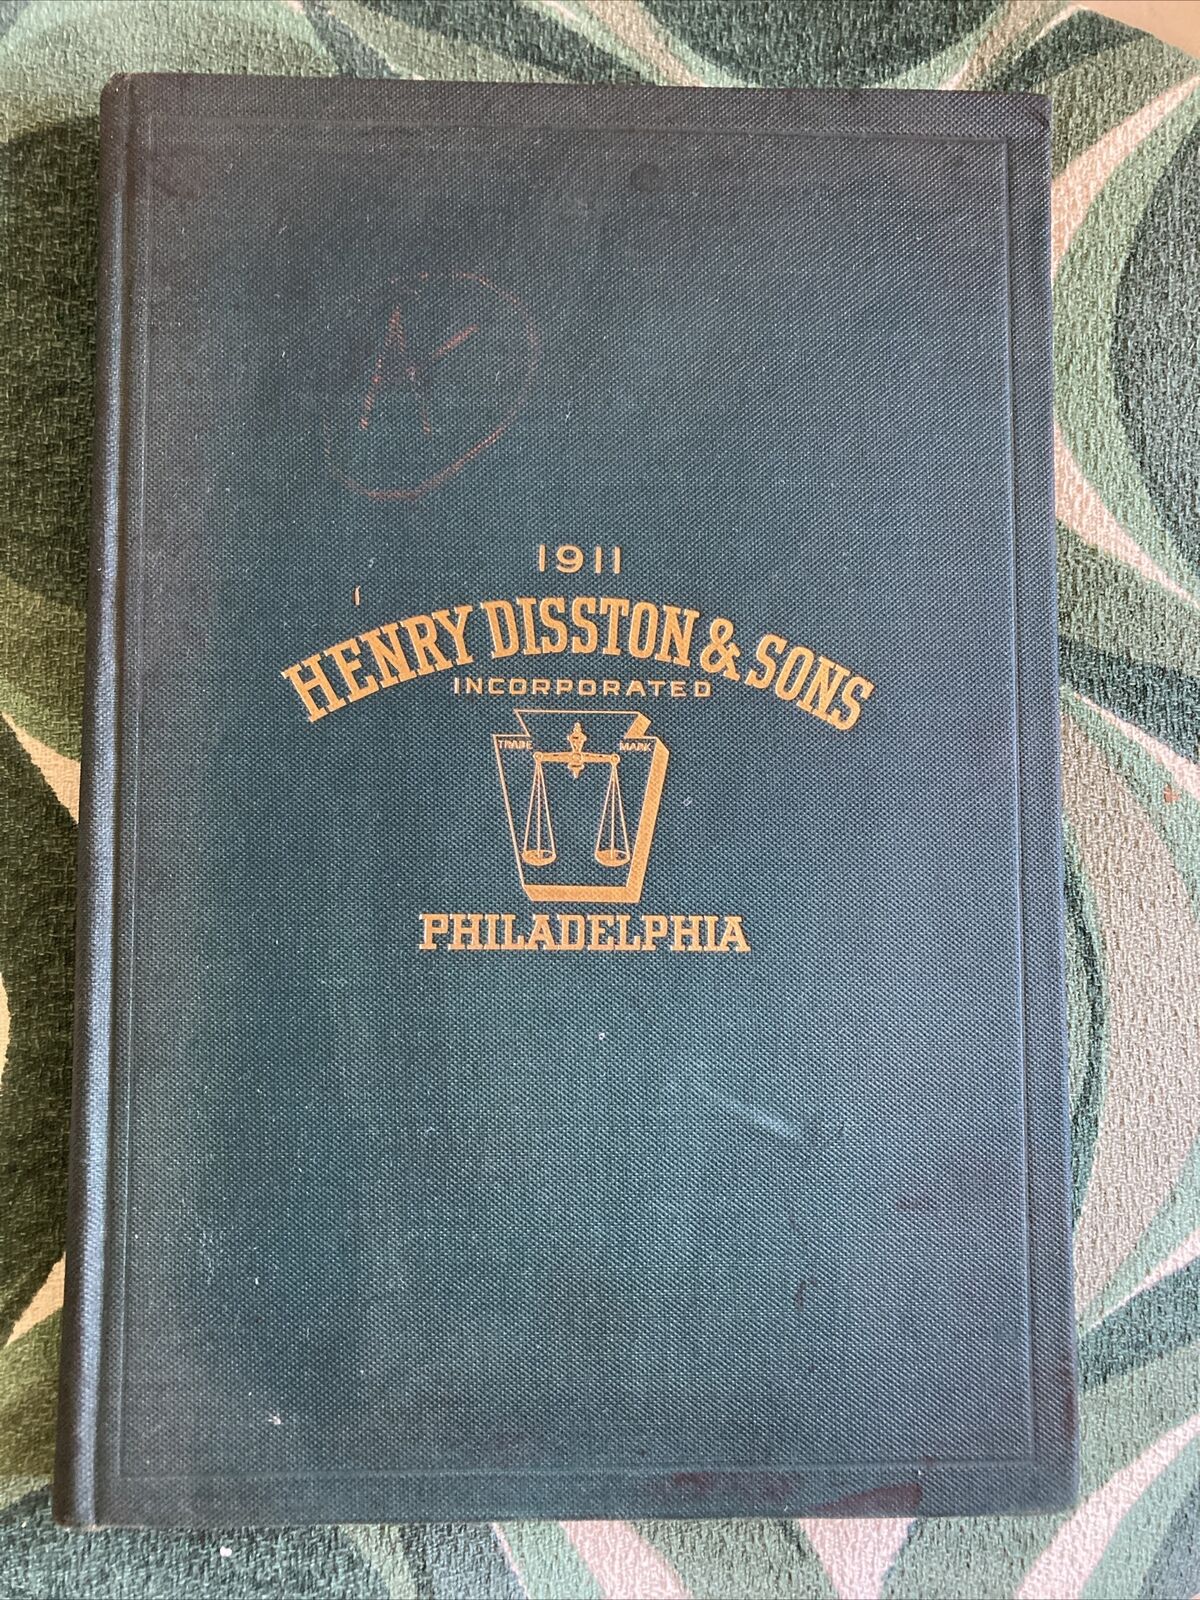 Henry Disston & Sons, Philada. - 1911 Dealer Size Catalog - 206 Pages